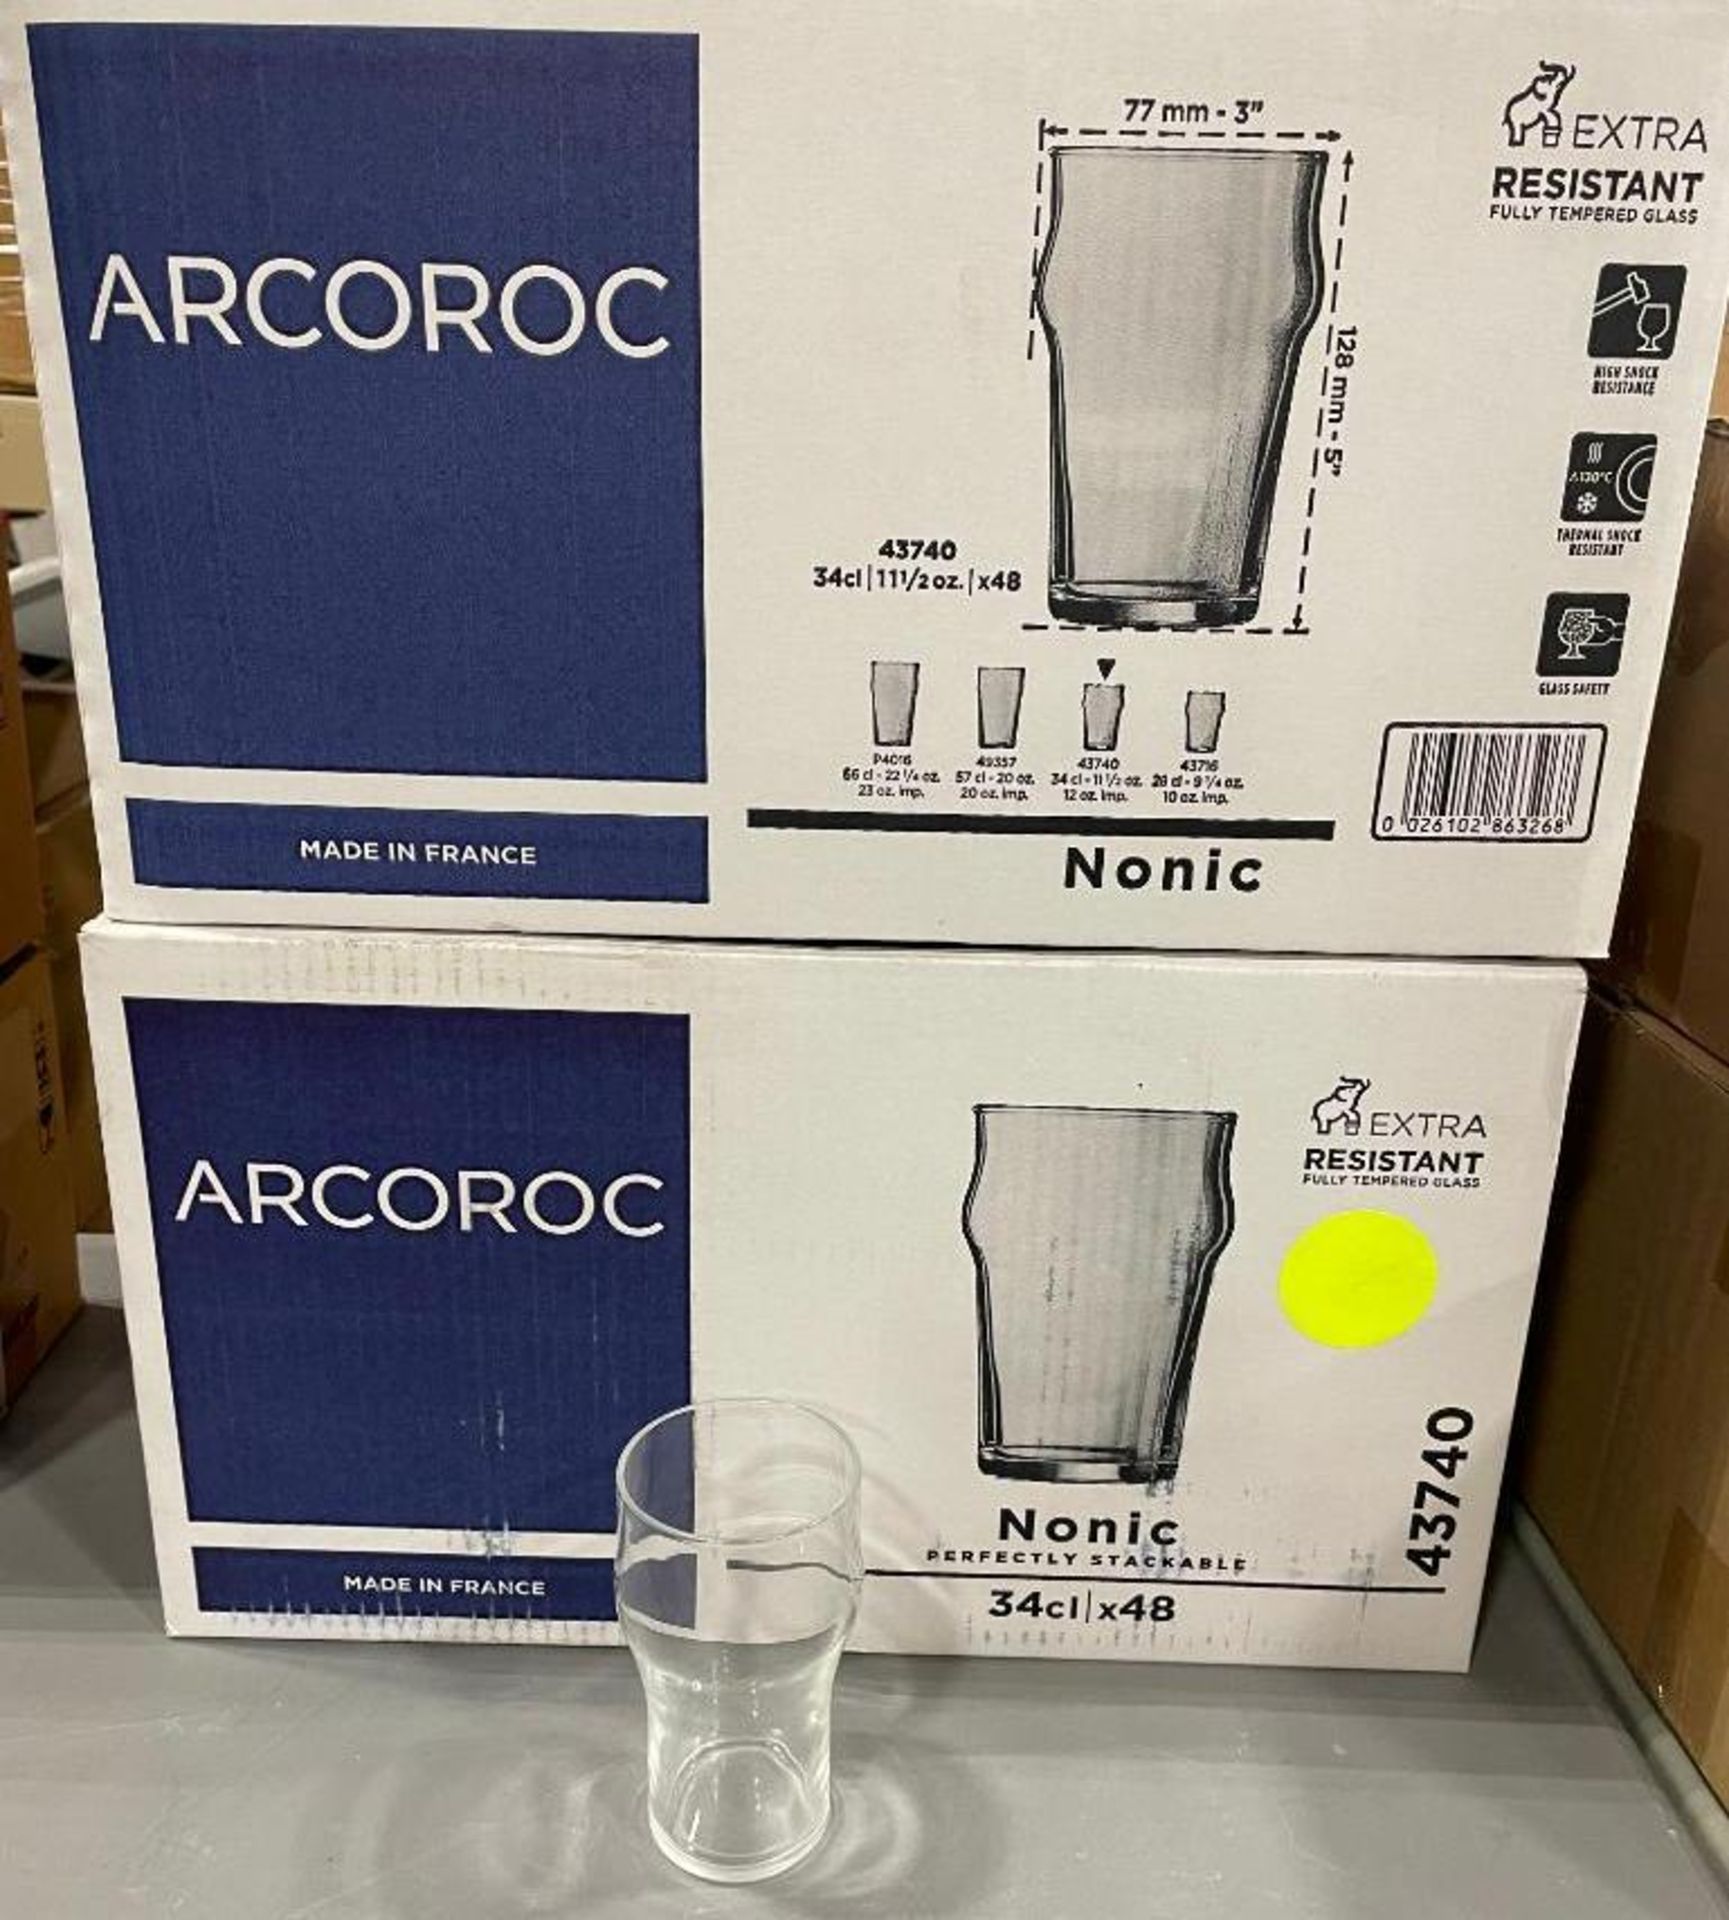 2 CASES OF 12OZ NONIC BEER GLASS, ARCOROC 43740 - 24 PER CASE - Image 4 of 14